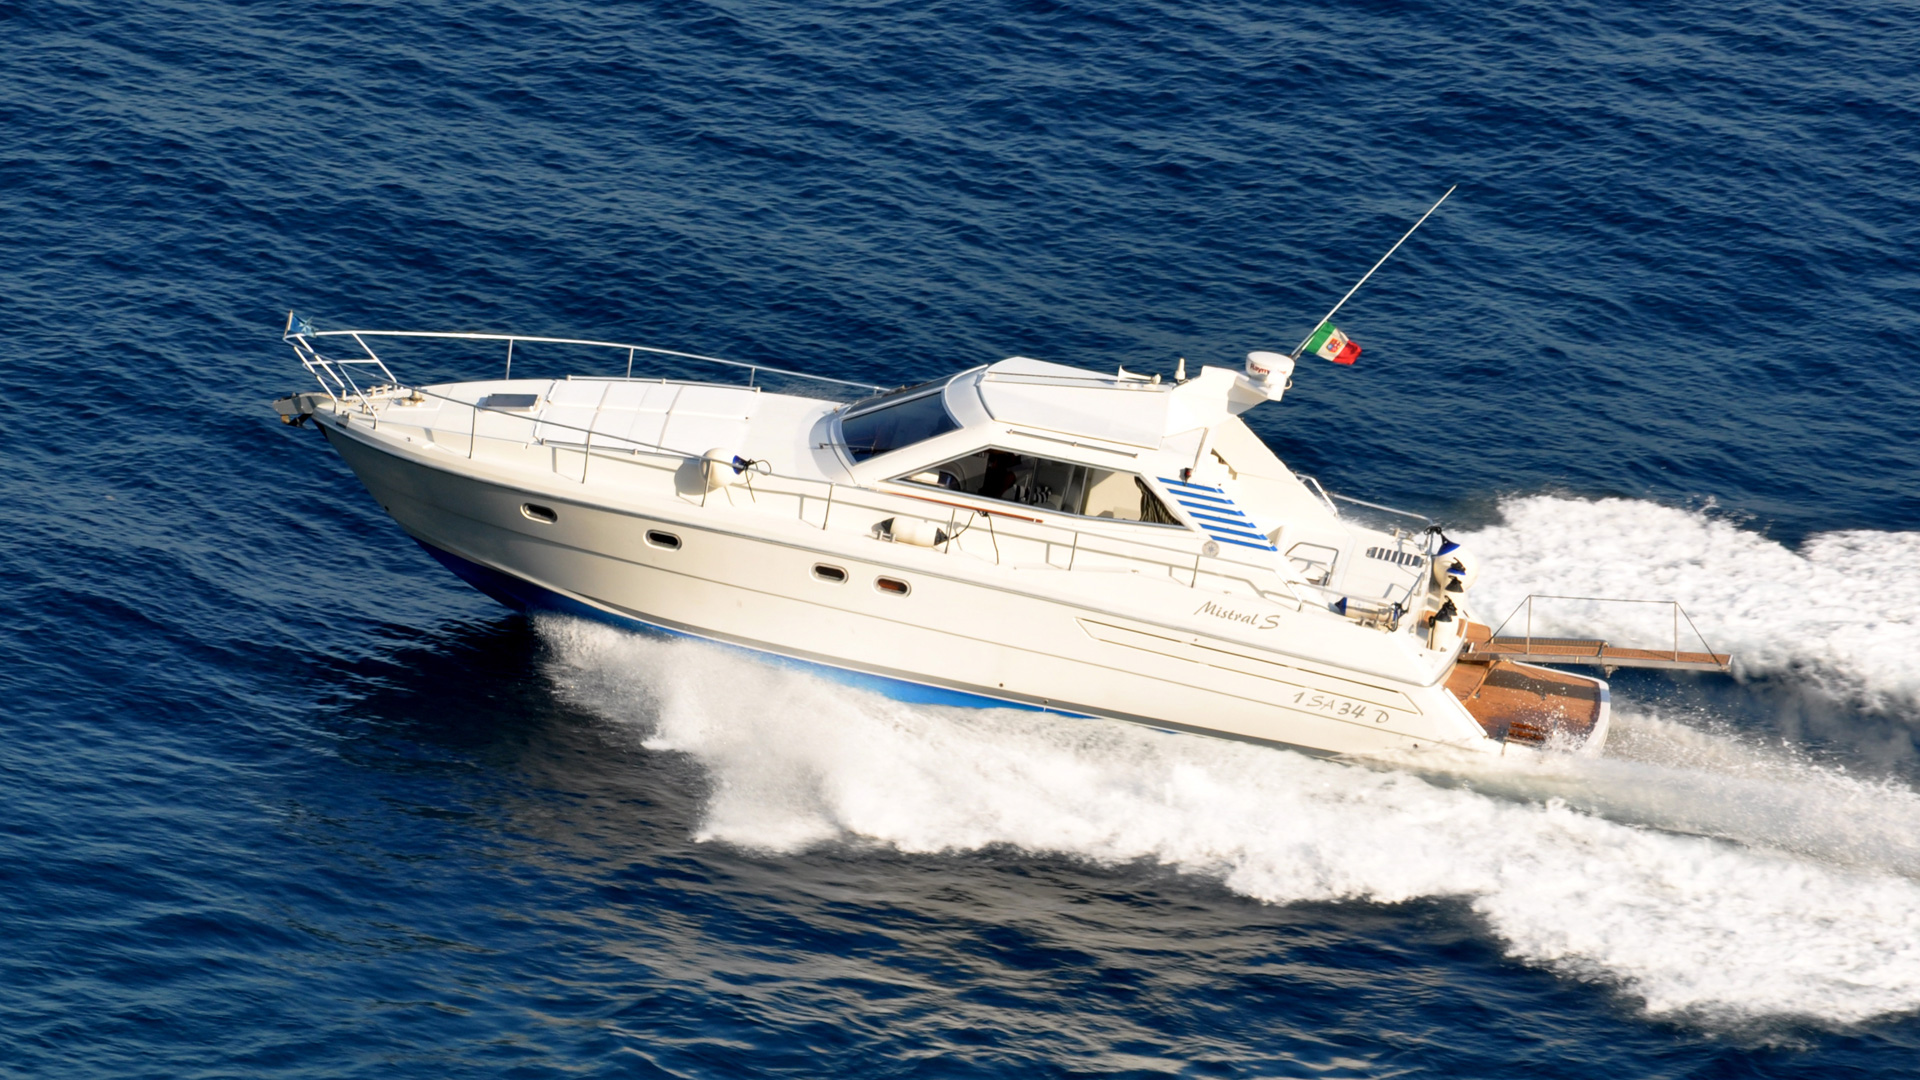 What are the specifications of a boat?